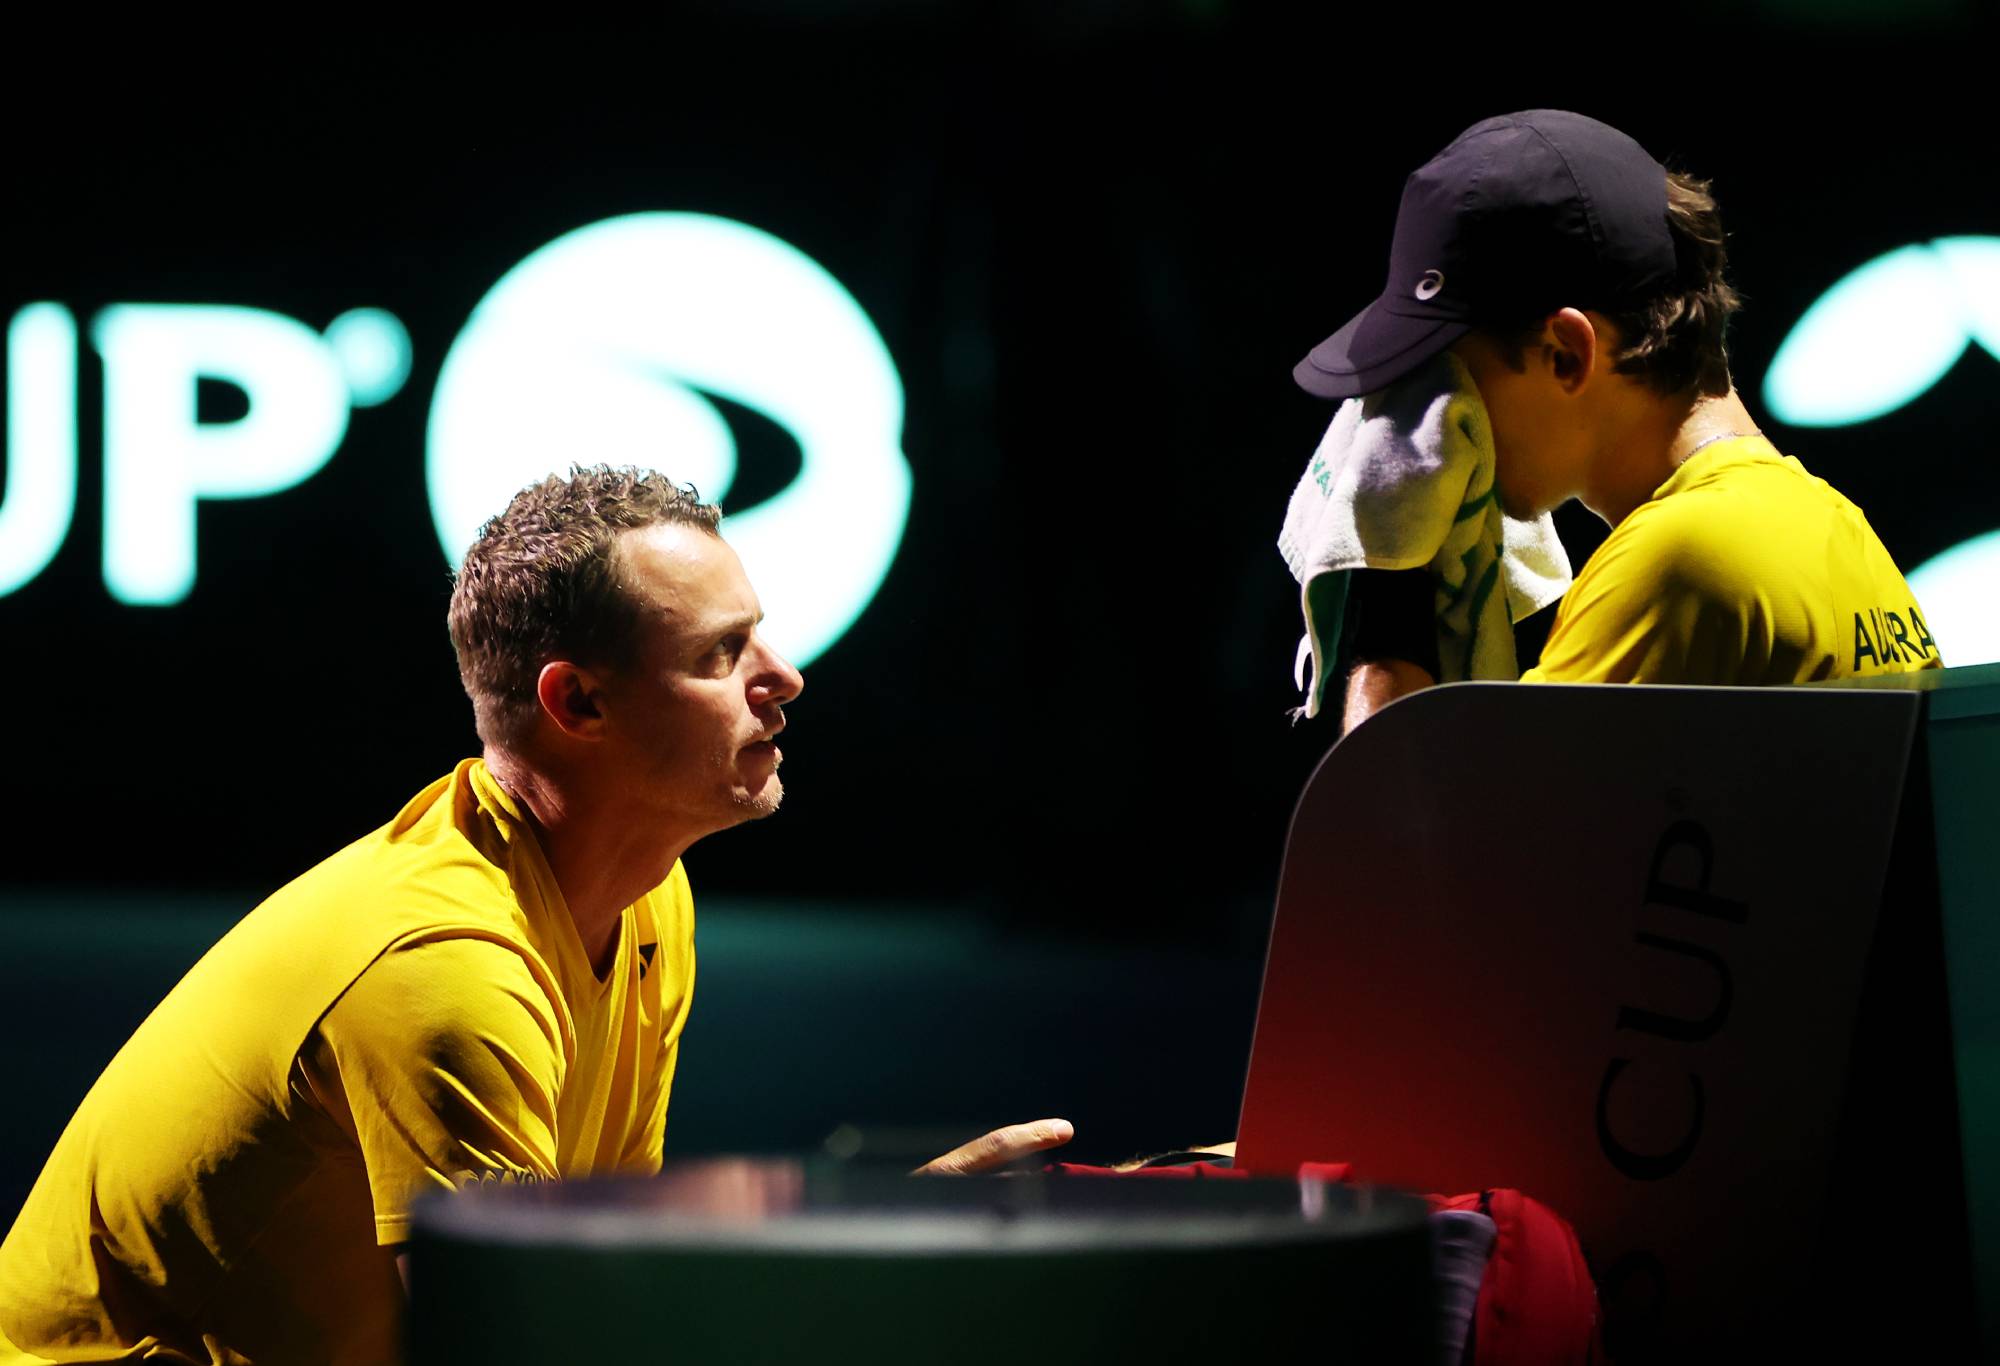 MALAGA, SPAIN - NOVEMBER 26: Lleyton Hewitt speaks to Alex De Minaur of Australia during the Davis Cup Final match against Italy at Palacio de Deportes Jose Maria Martin Carpena on November 26, 2023 in Malaga, Spain. (Photo by Clive Brunskill/Getty Images for ITF)